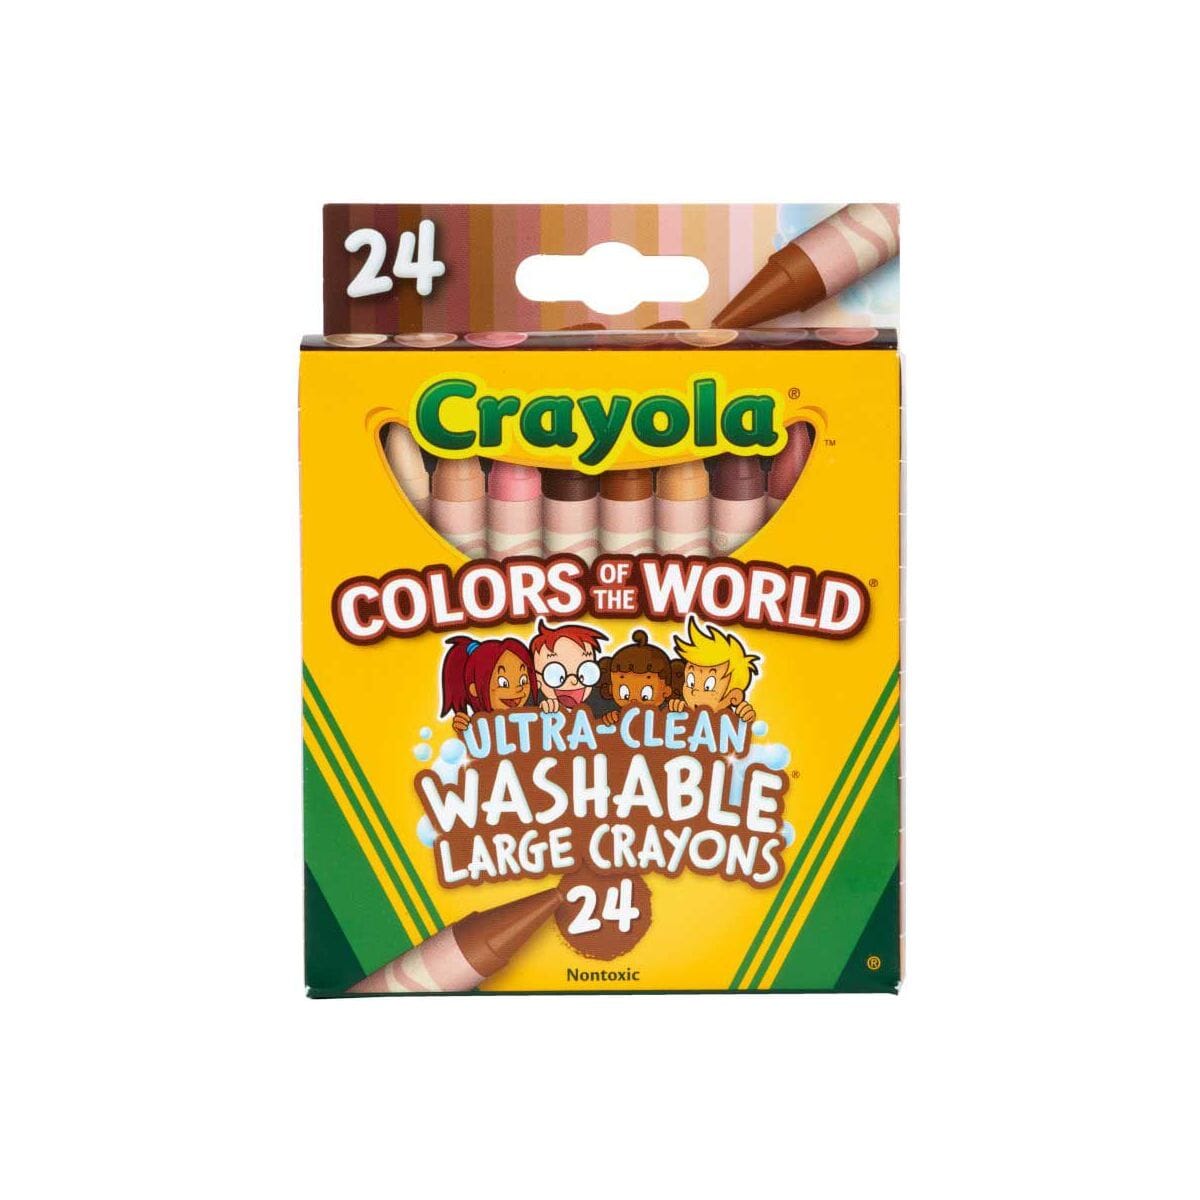 Crayola Ultra-Clean Washable Crayons 24 per Pack